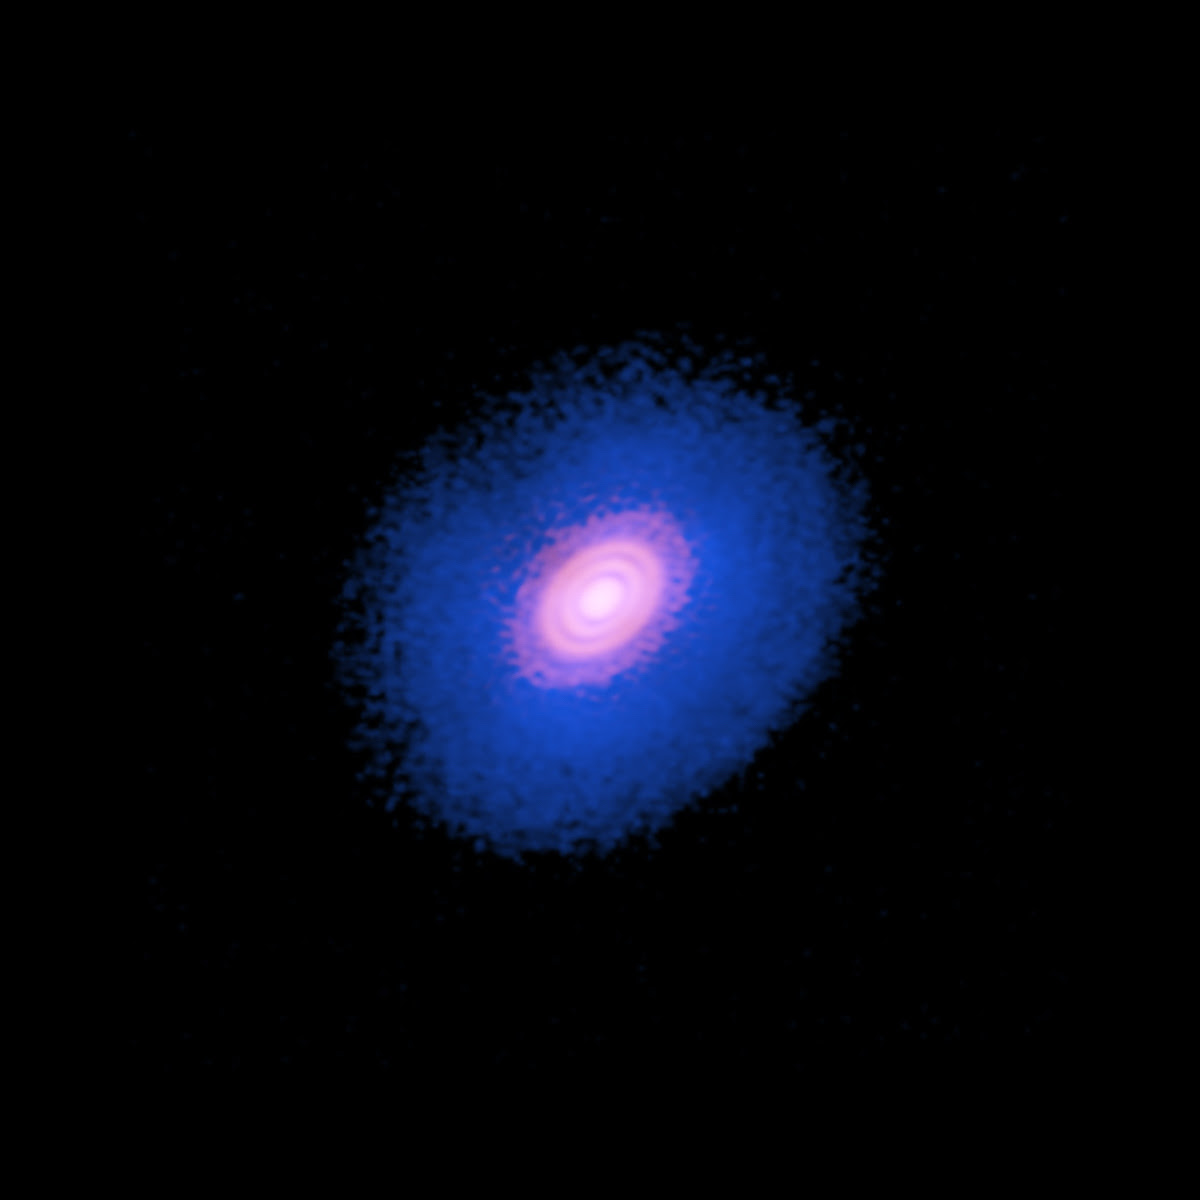 An ALMA image of the star HD 163296 and its protoplanetary disk as seen in dust. New observations suggested that two planets, each about the size of Saturn, are in orbit around the star. These planets, which are not yet fully formed, revealed themselves in the dual imprint they left in both the dust and the gas portions of the star’s protoplanetary disk. (Credit: ALMA [ESO/NAOJ/NRAO]/Andrea Isella/B. Saxton [NRAO/AUI/NSF])